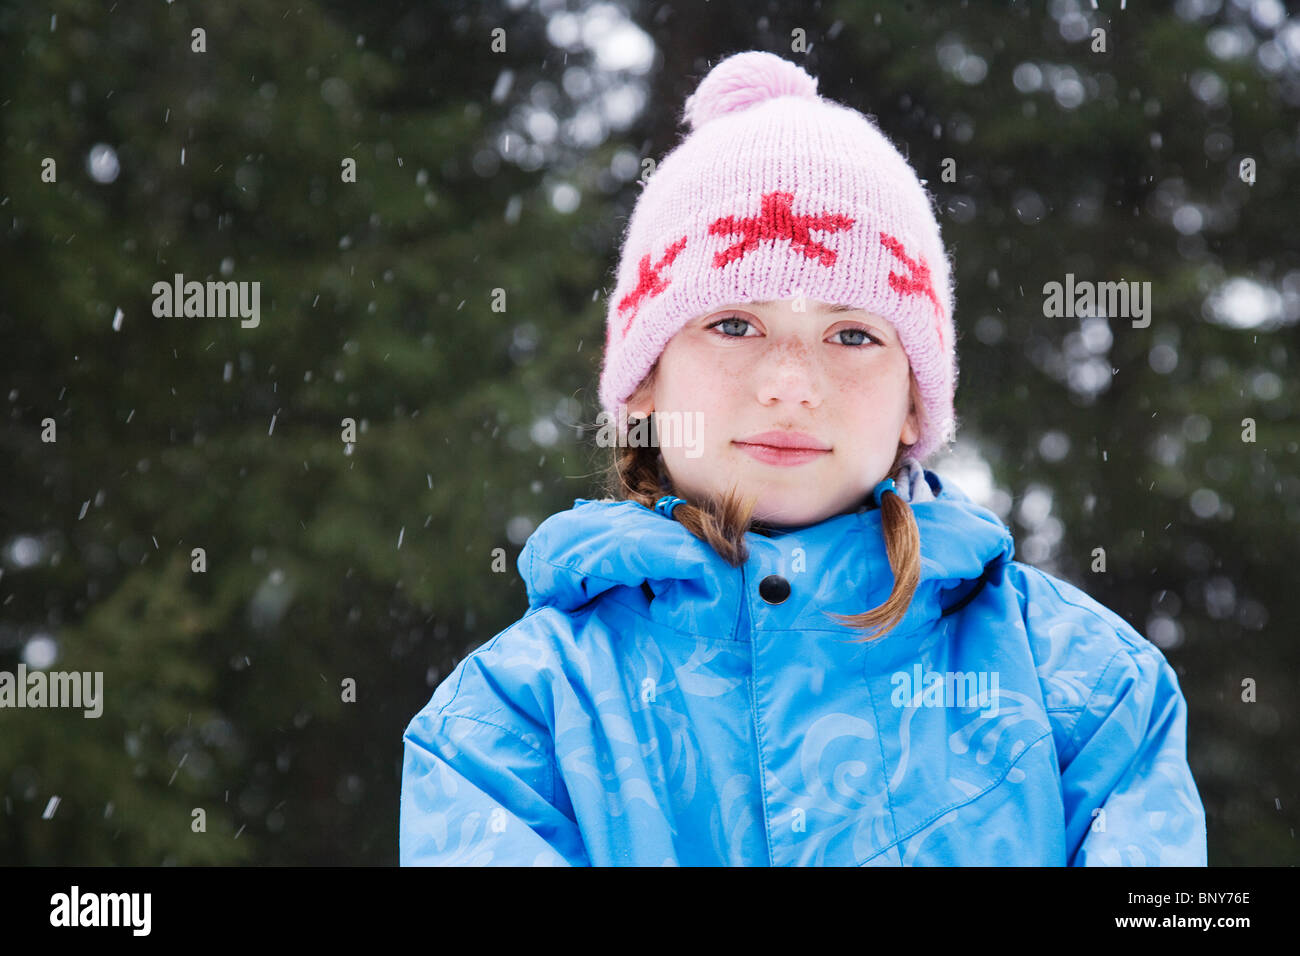 Girl with wooly hat smiling Stock Photo